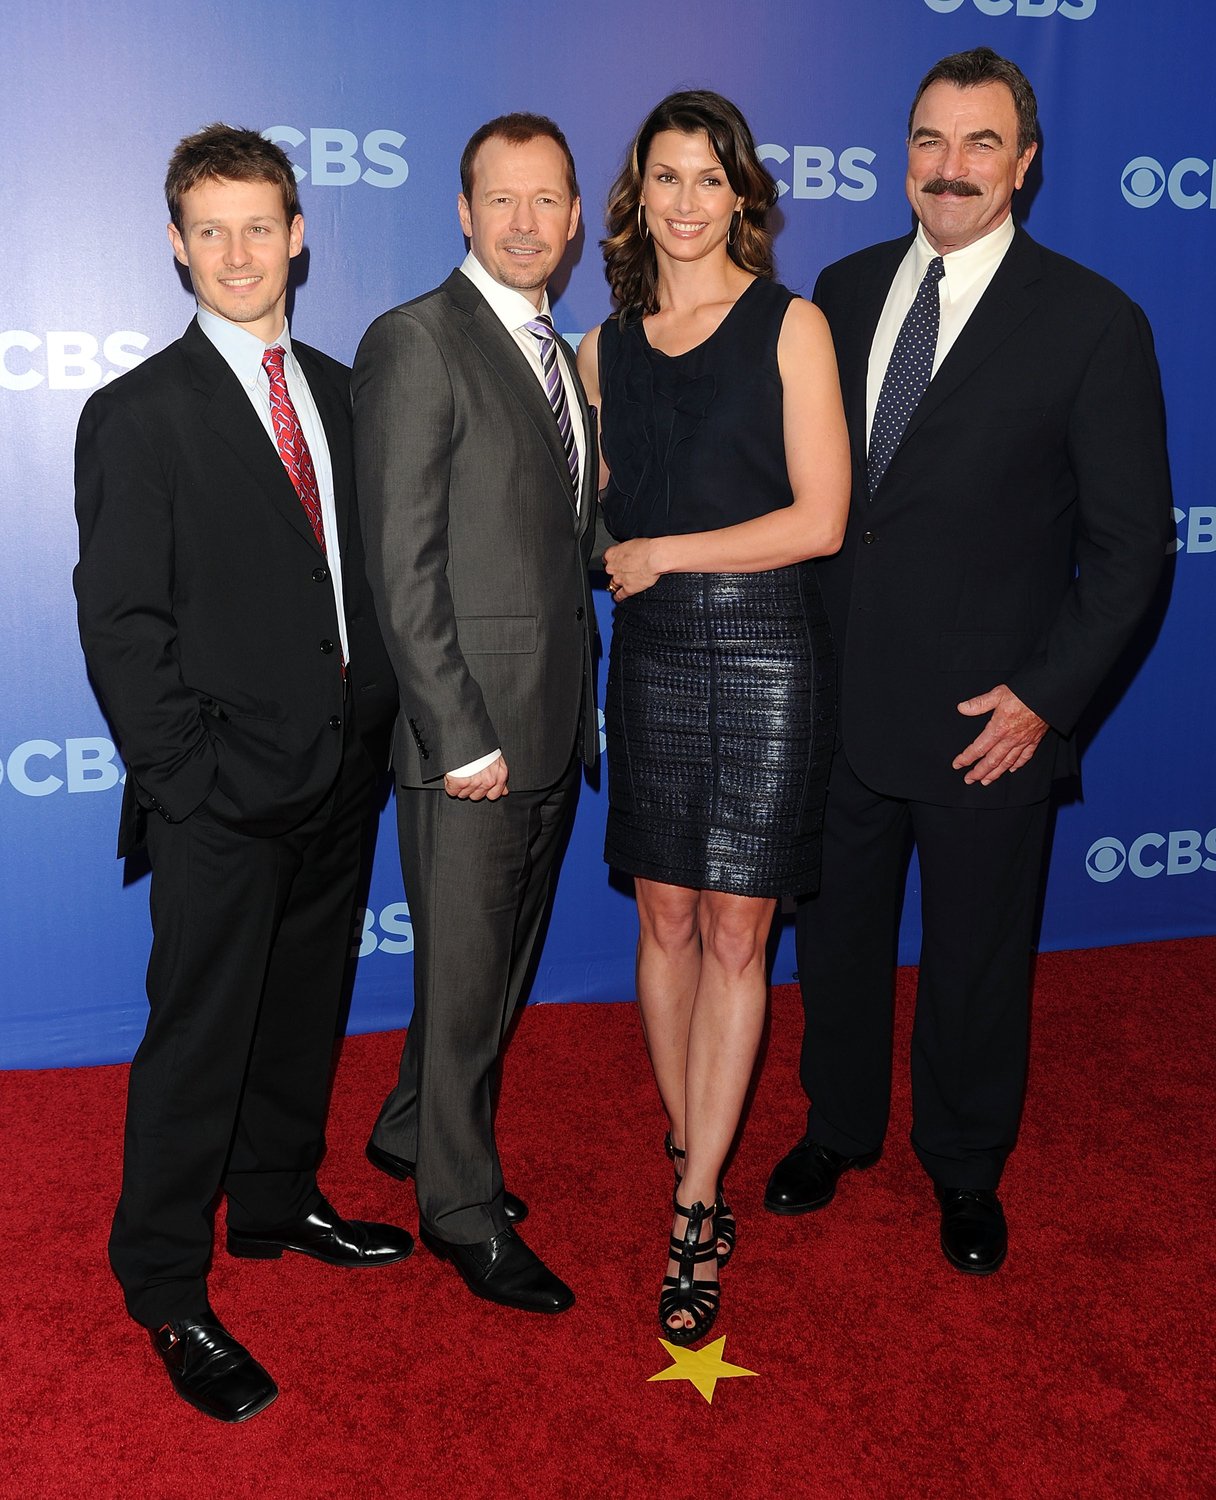 Will Estes, Donnie Wahlberg, Bridget Moynahan and Tom Selleck attend the 2010 CBS UpFront at Damrosch Park, Lincoln Center on May 19, 2010 in New York City | Photo: GettyImages